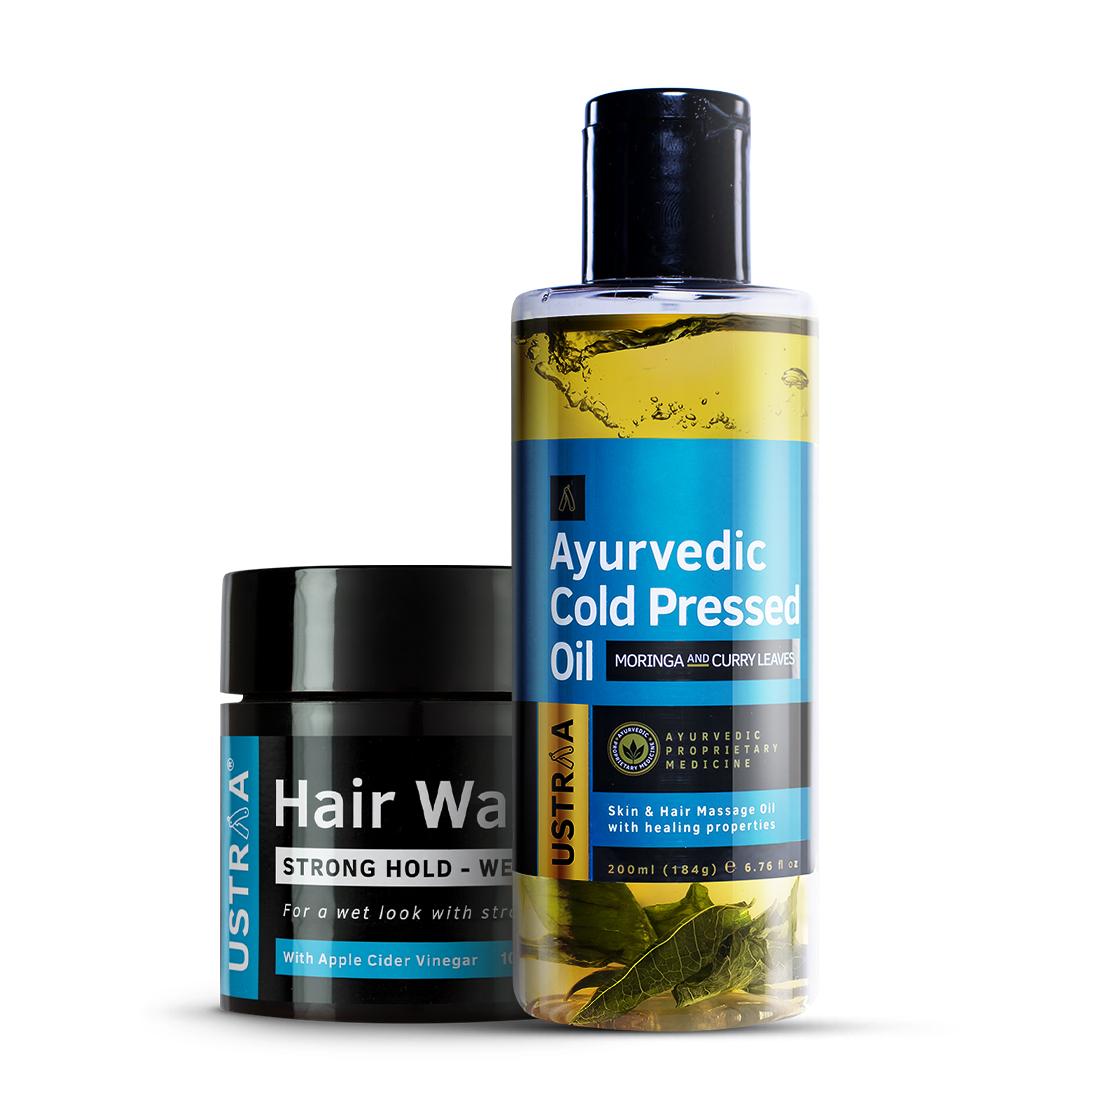 Ayurvedic Cold Pressed Oil & Hair Wax Wet Look Strong Hold Combo